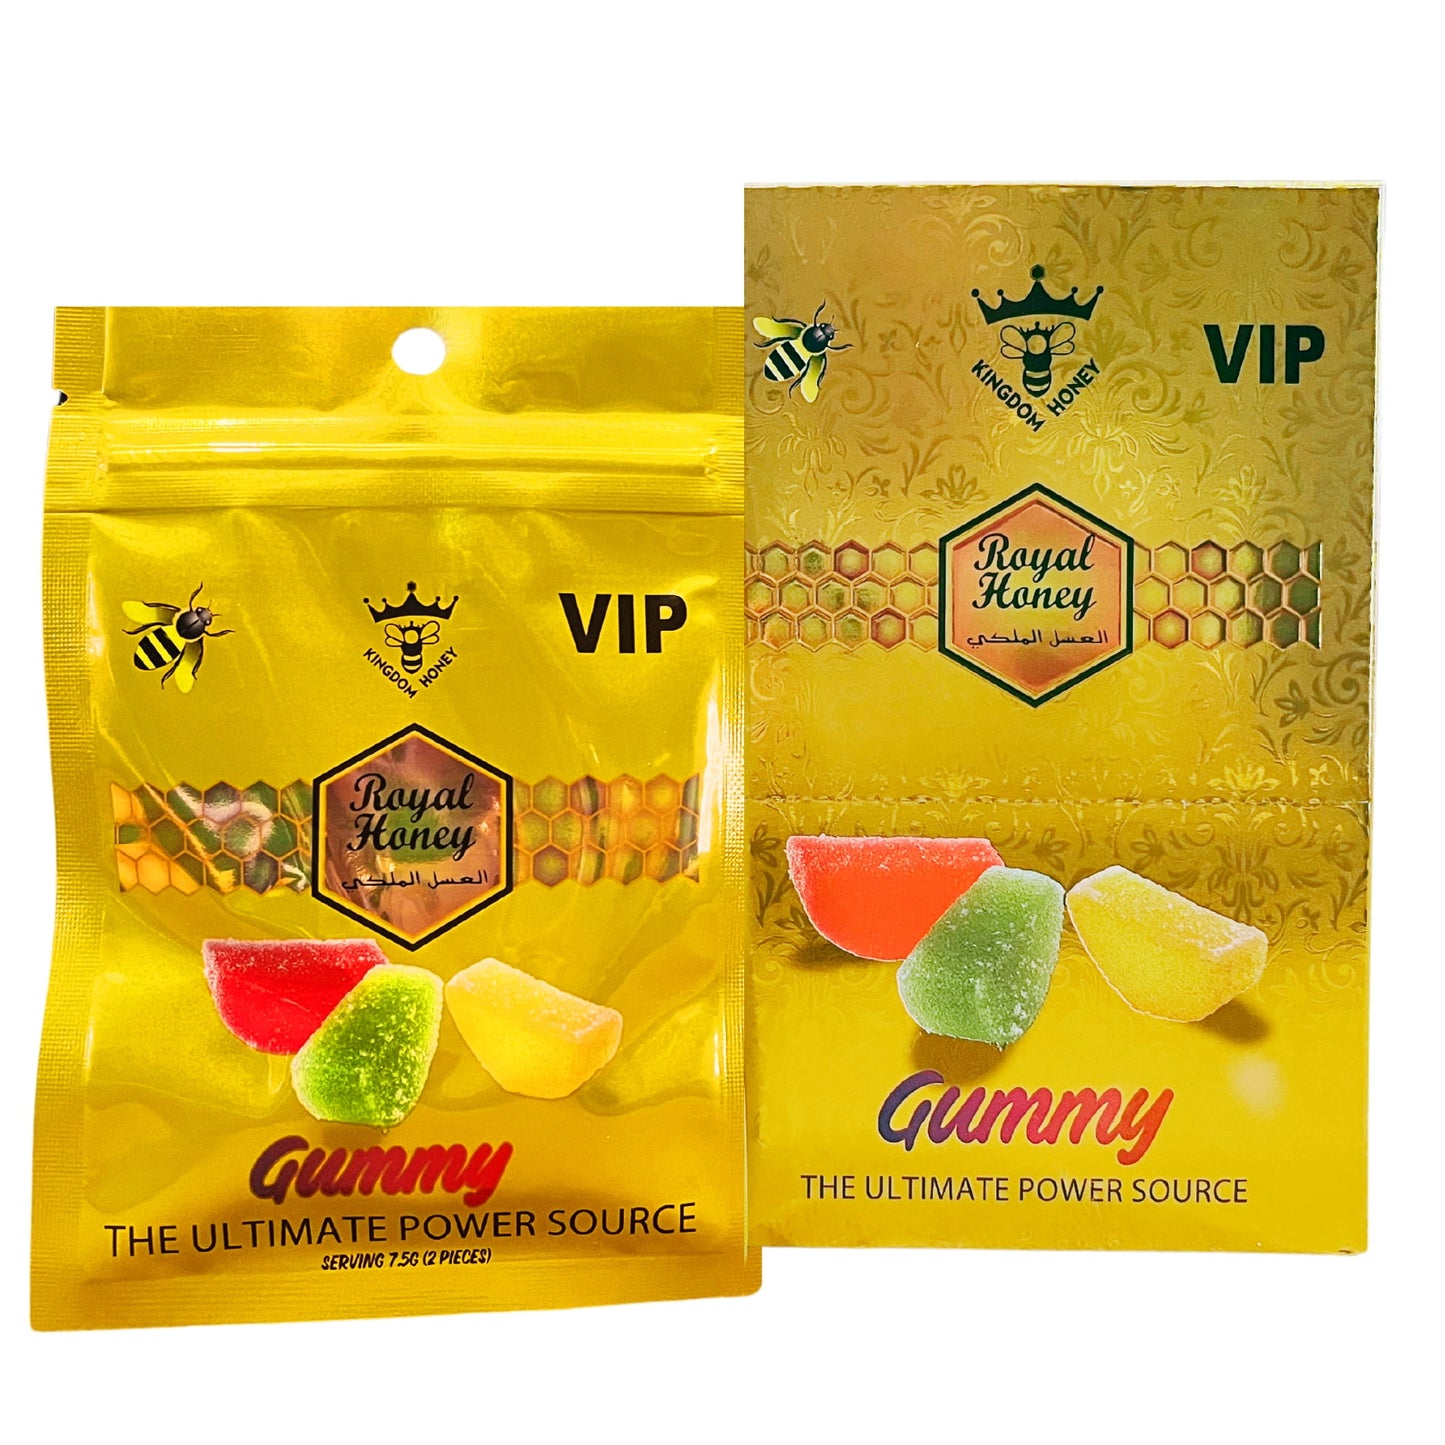 R0YAL KINGDOM V I P Gummy, THE UITIMATE P0WER S0URCE, Serving (7.5g - 2 Pcs) |Pack of 24 Bags